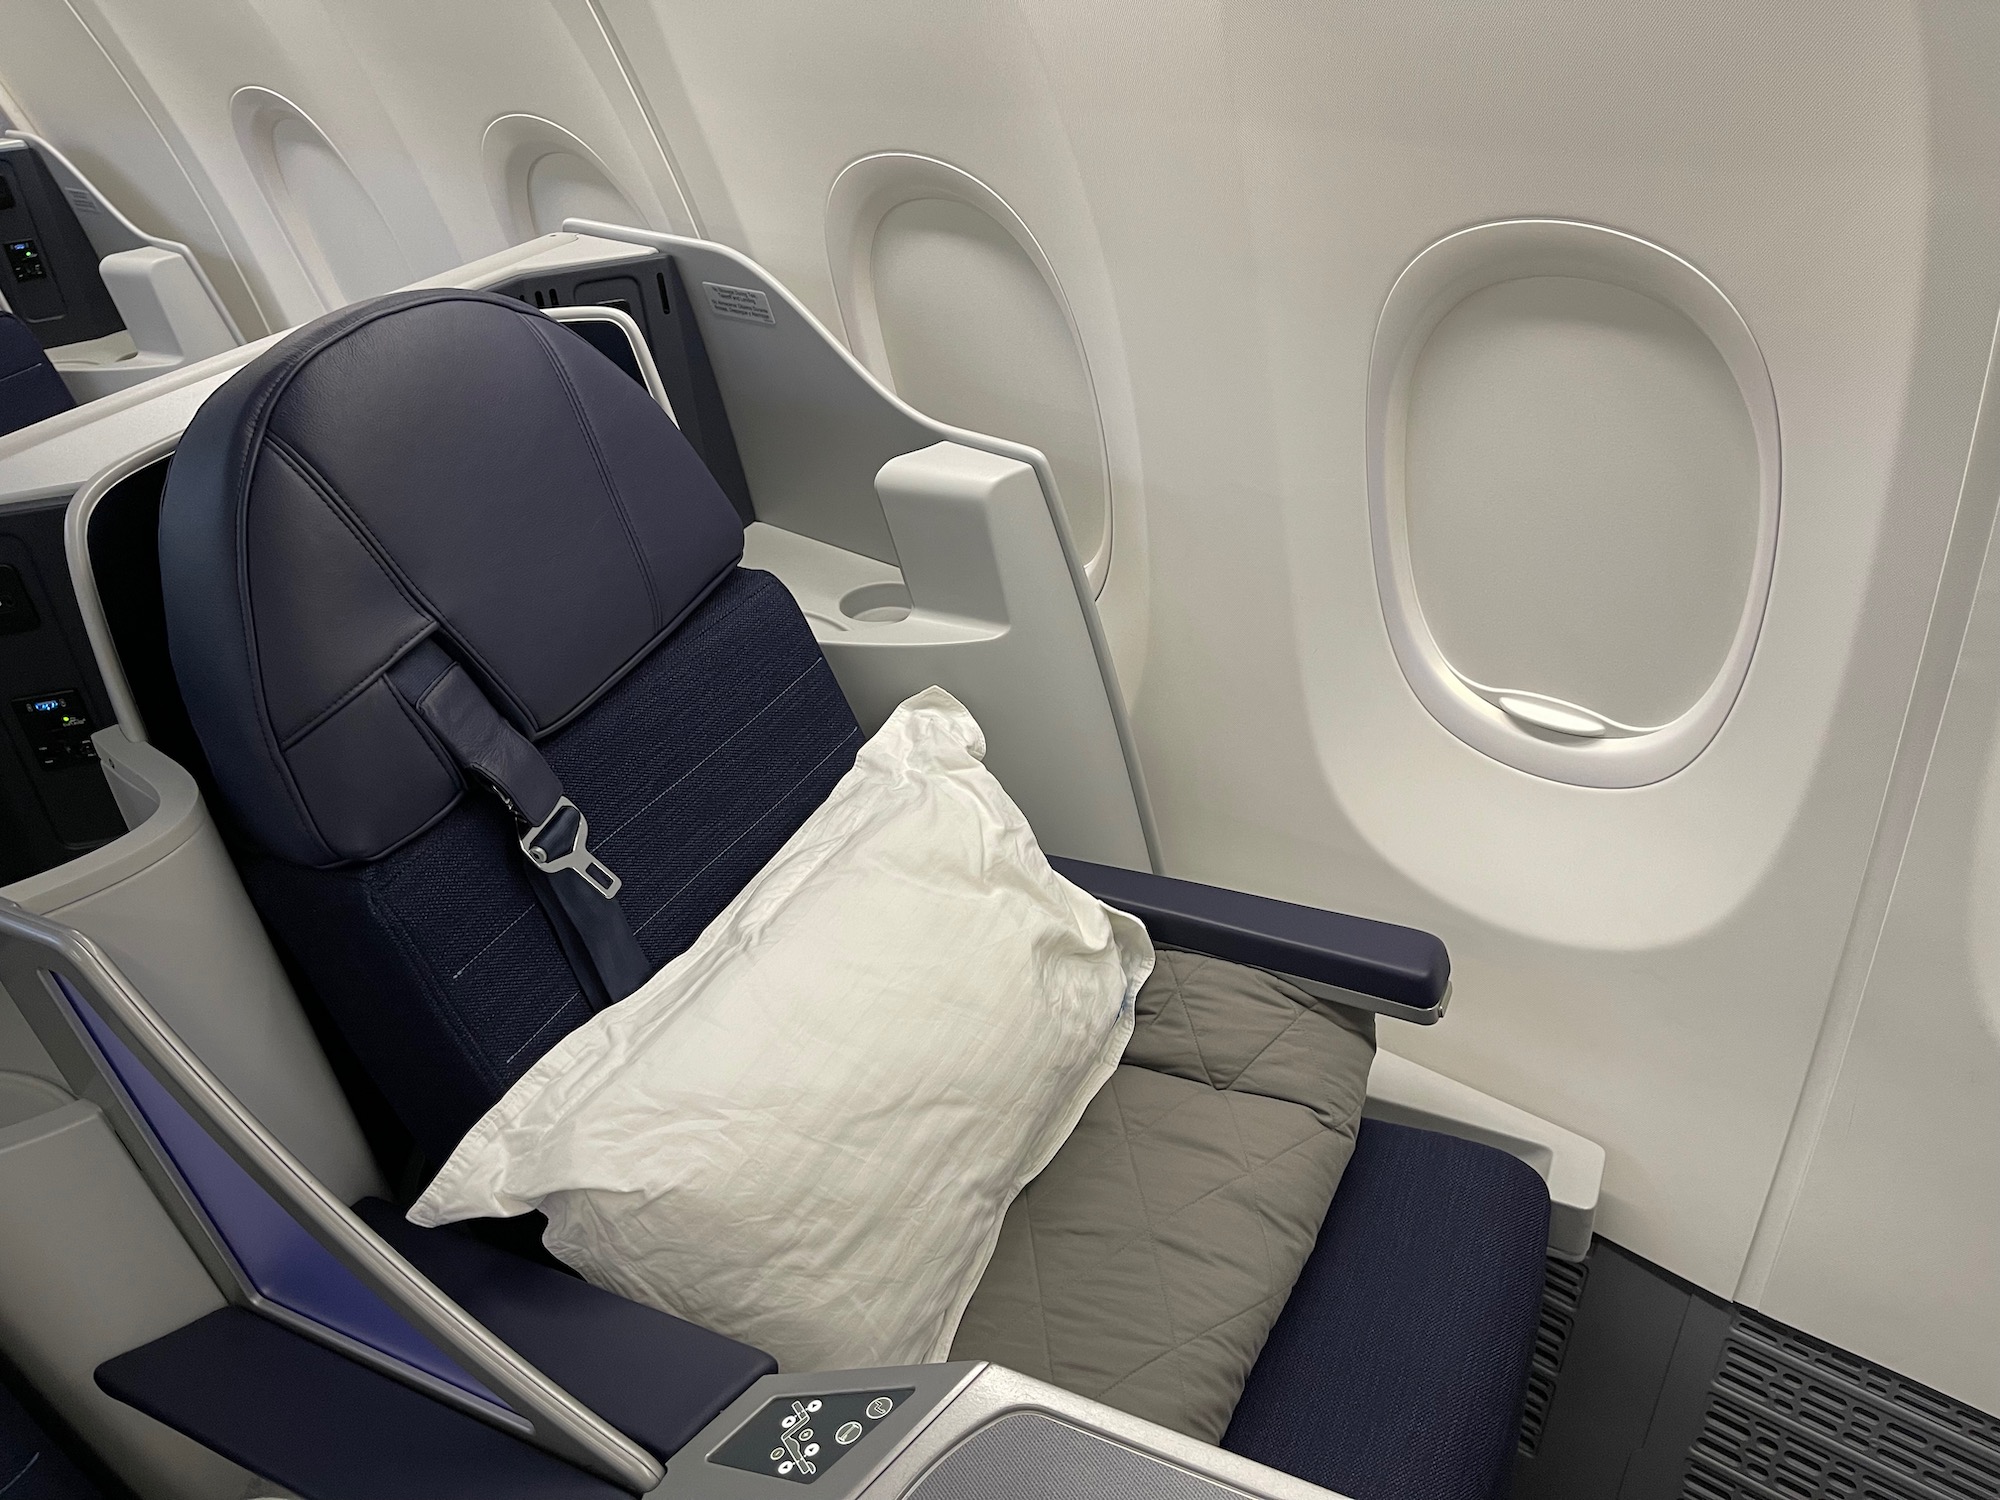 Copa Airlines Goes With Flat Beds For 737 MAX, But There's More 